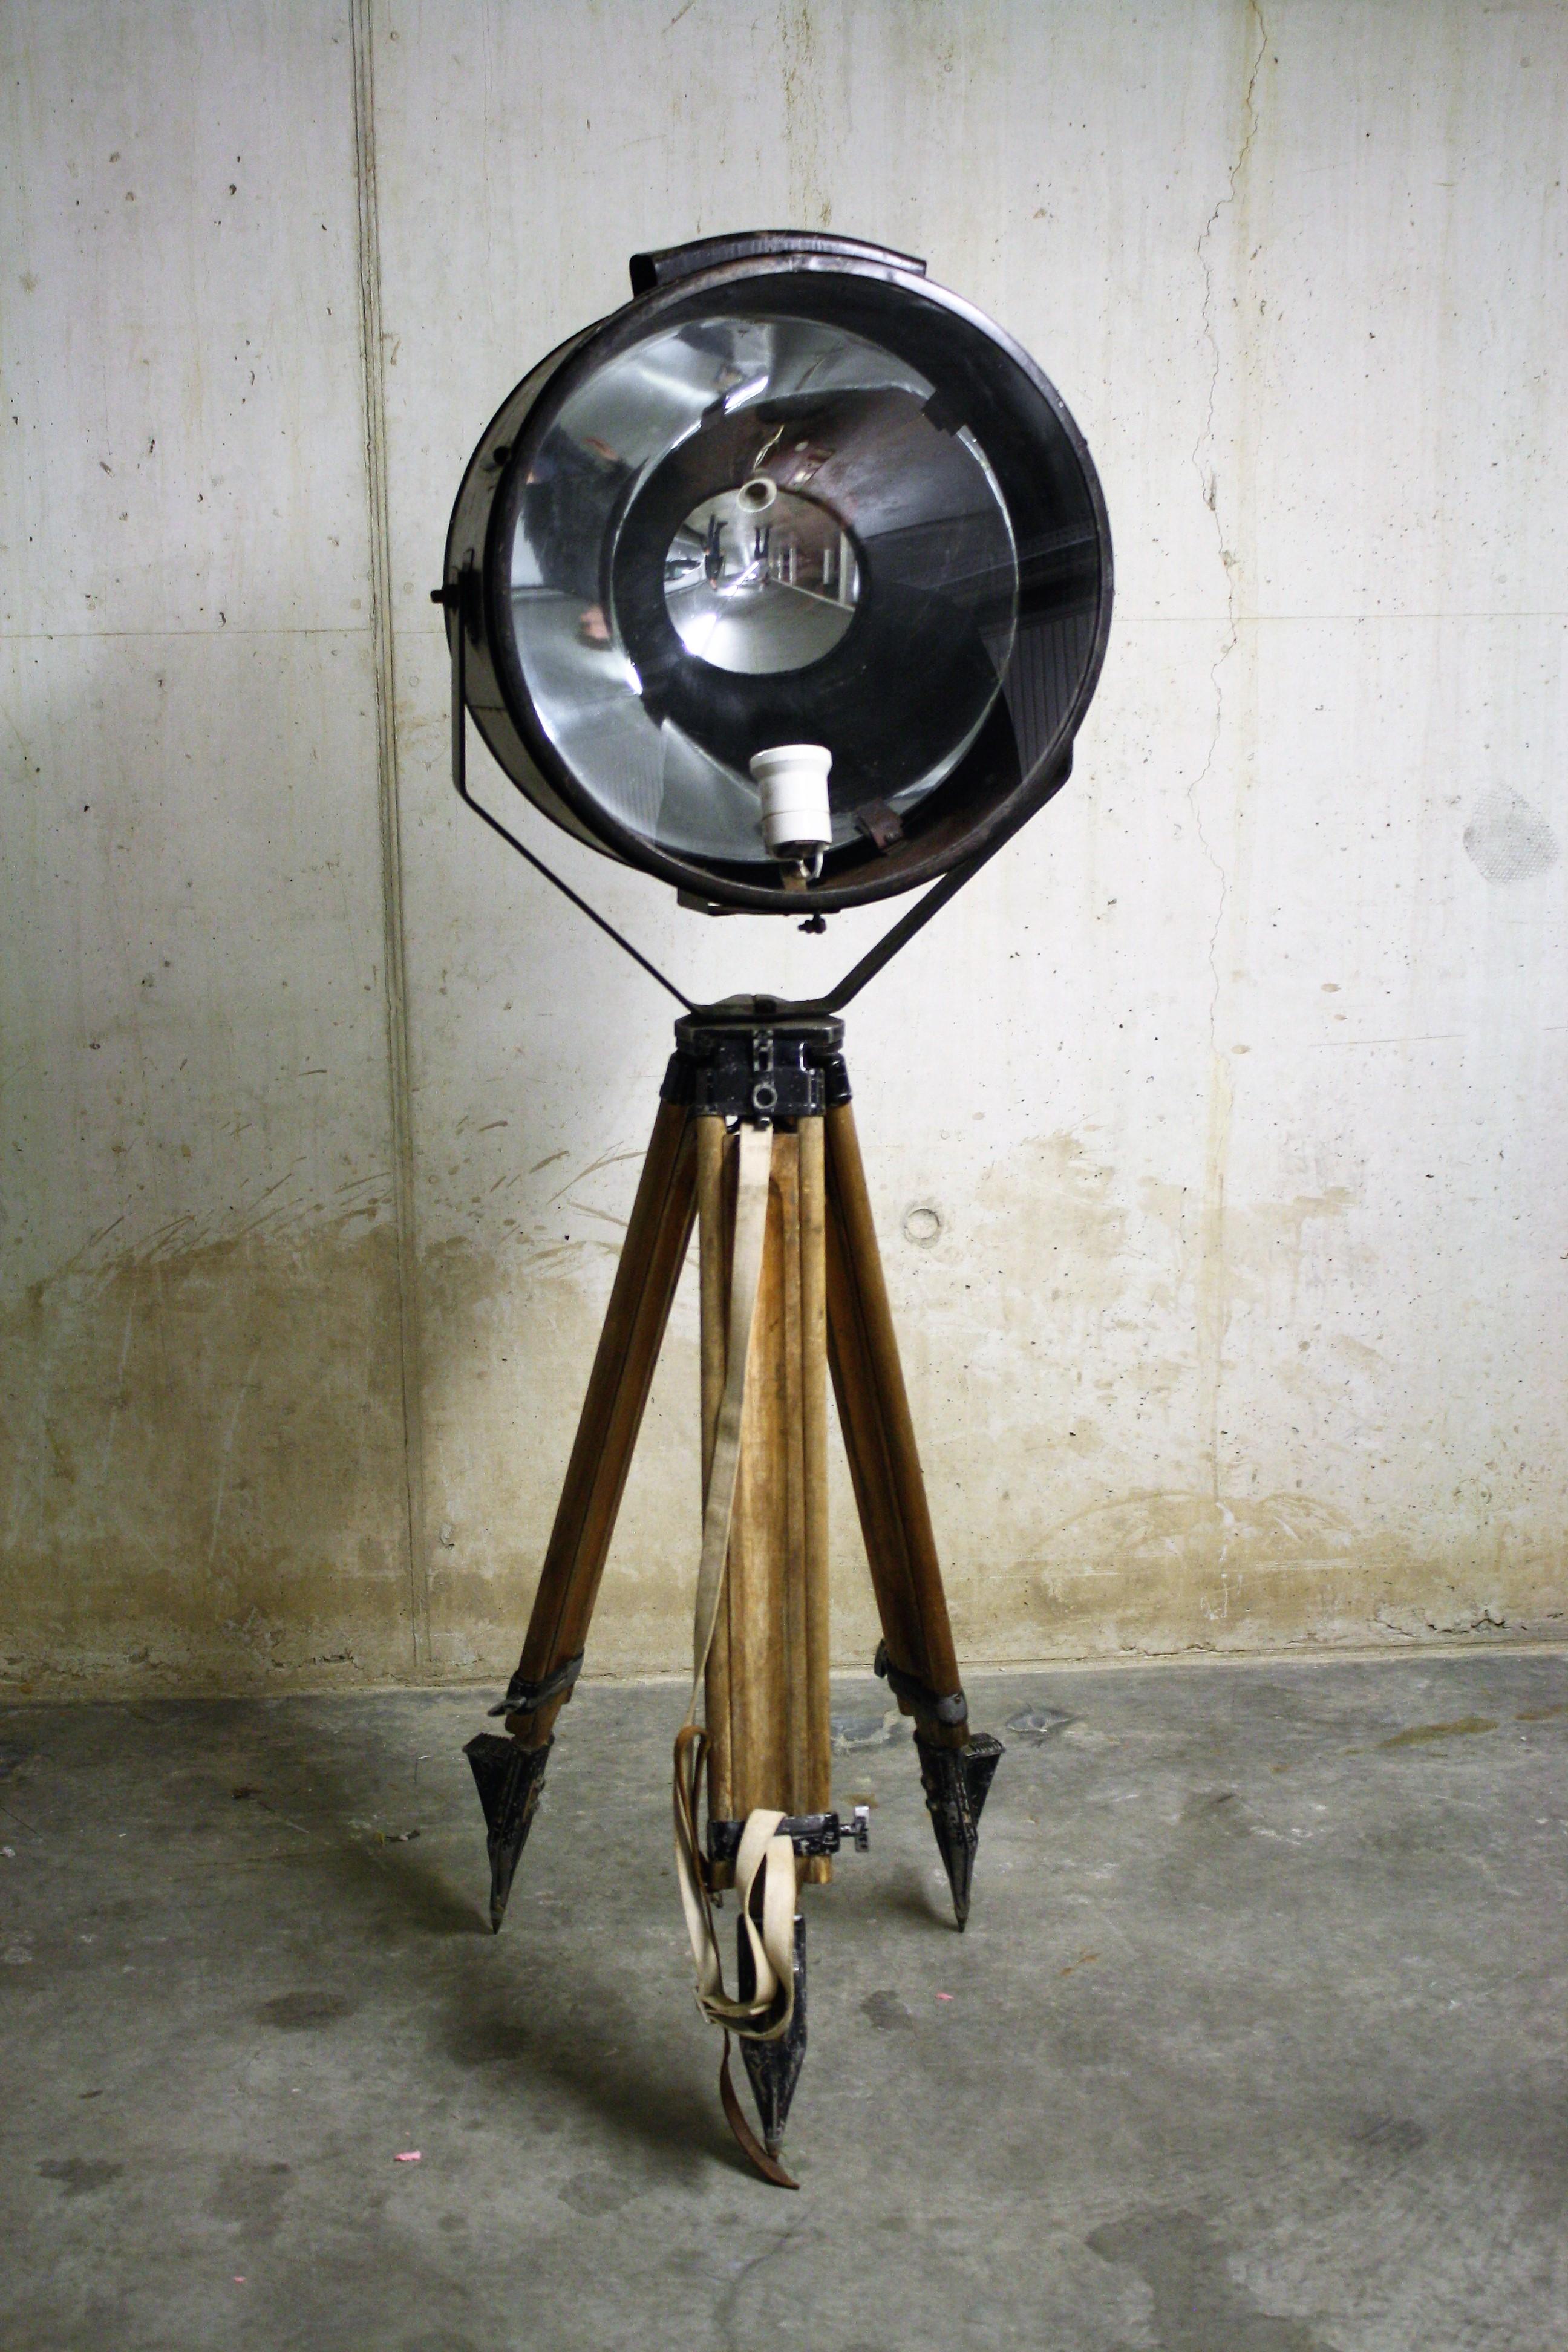 Wonderful large industrial floor lamp.

This lamp was salvaged from an old Russian ship and was used to make light on the upper deck.

The lamp has a mirrored reflector on the inside in order to transmit stronger light.

To make it authentic